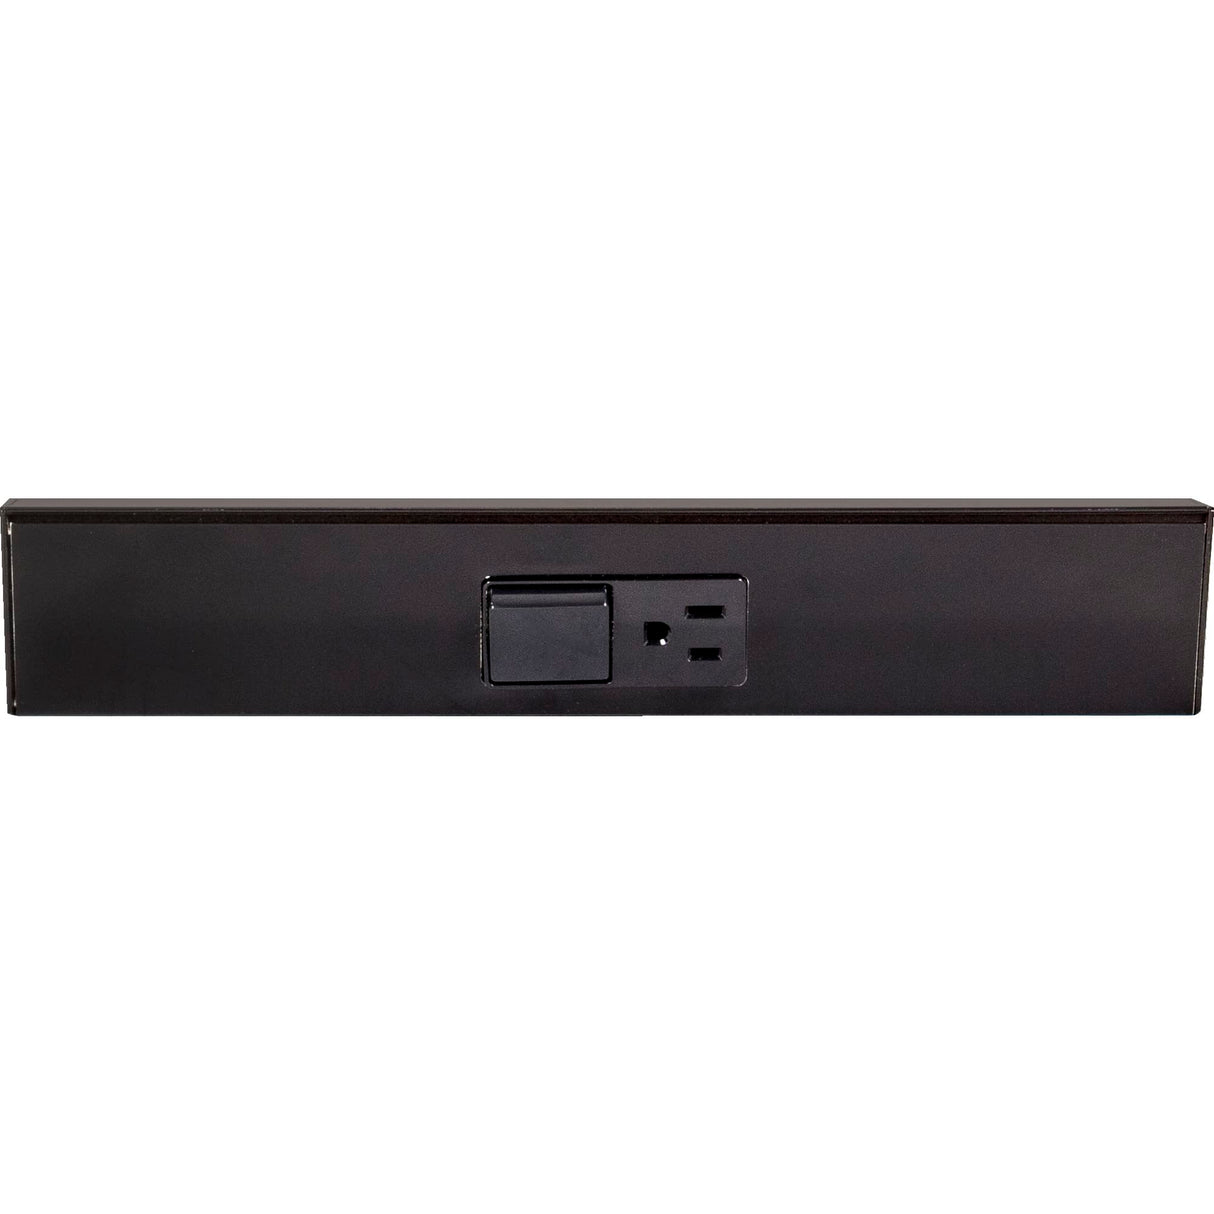 Task Lighting TRS12-1B-BK 12" TR Switch Series Angle Power Strip, Single Switch, Black Finish, Black Switch and Receptacles